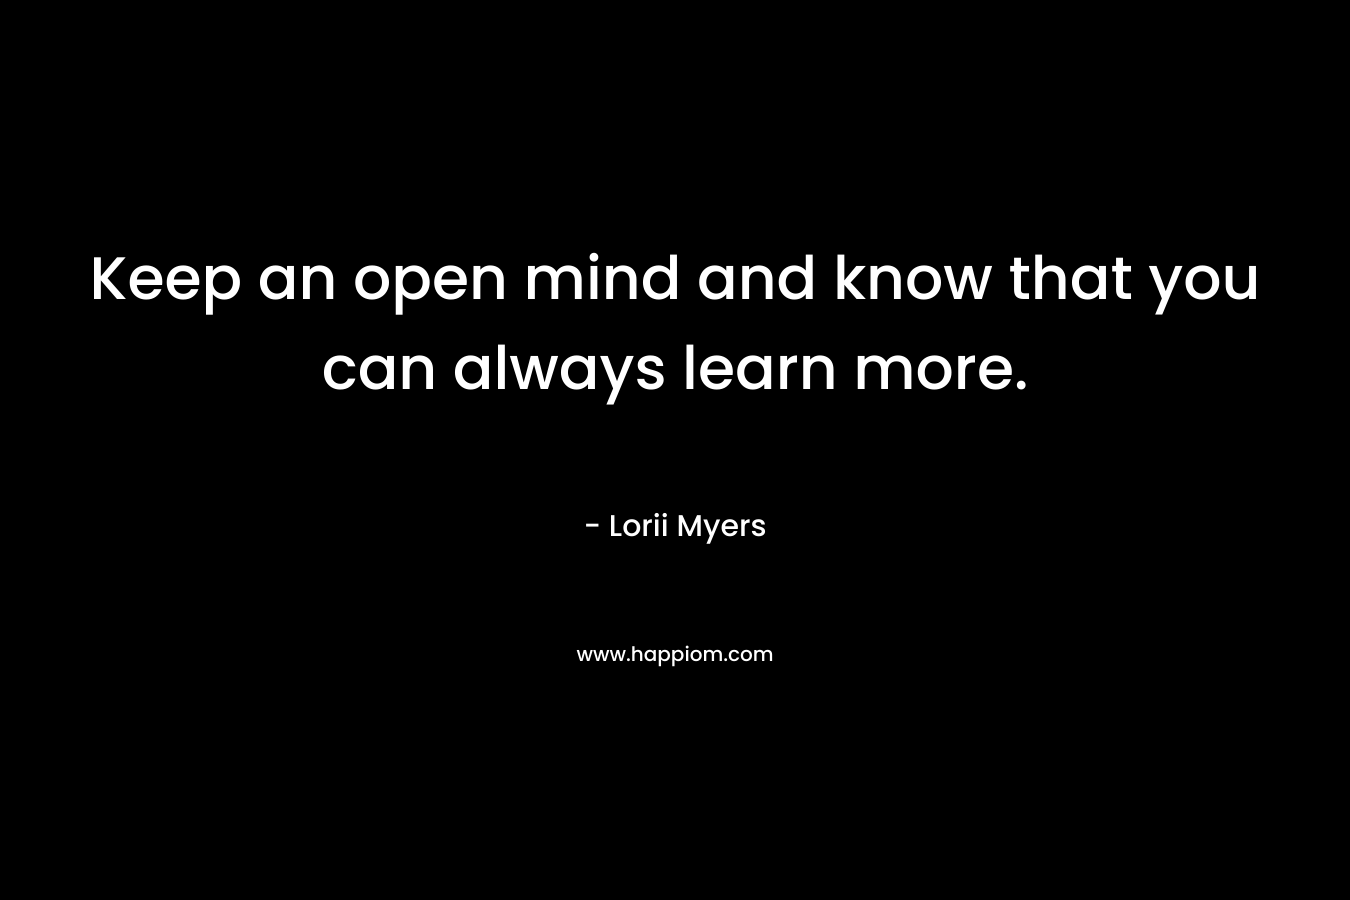 Keep an open mind and know that you can always learn more.